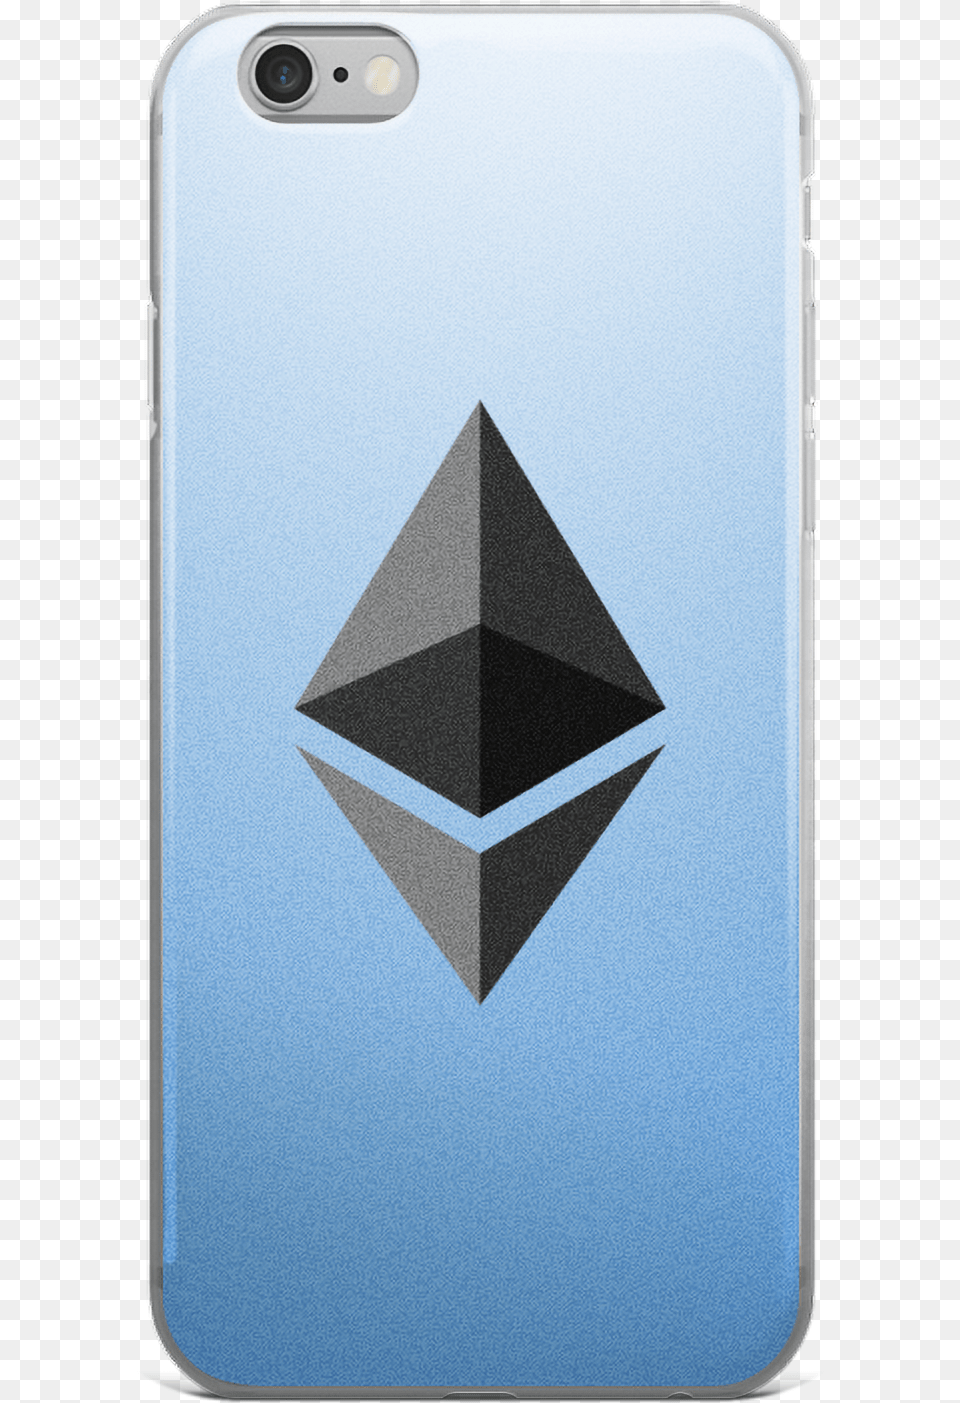 Mobile Phone Case, Electronics, Mobile Phone, Triangle Png